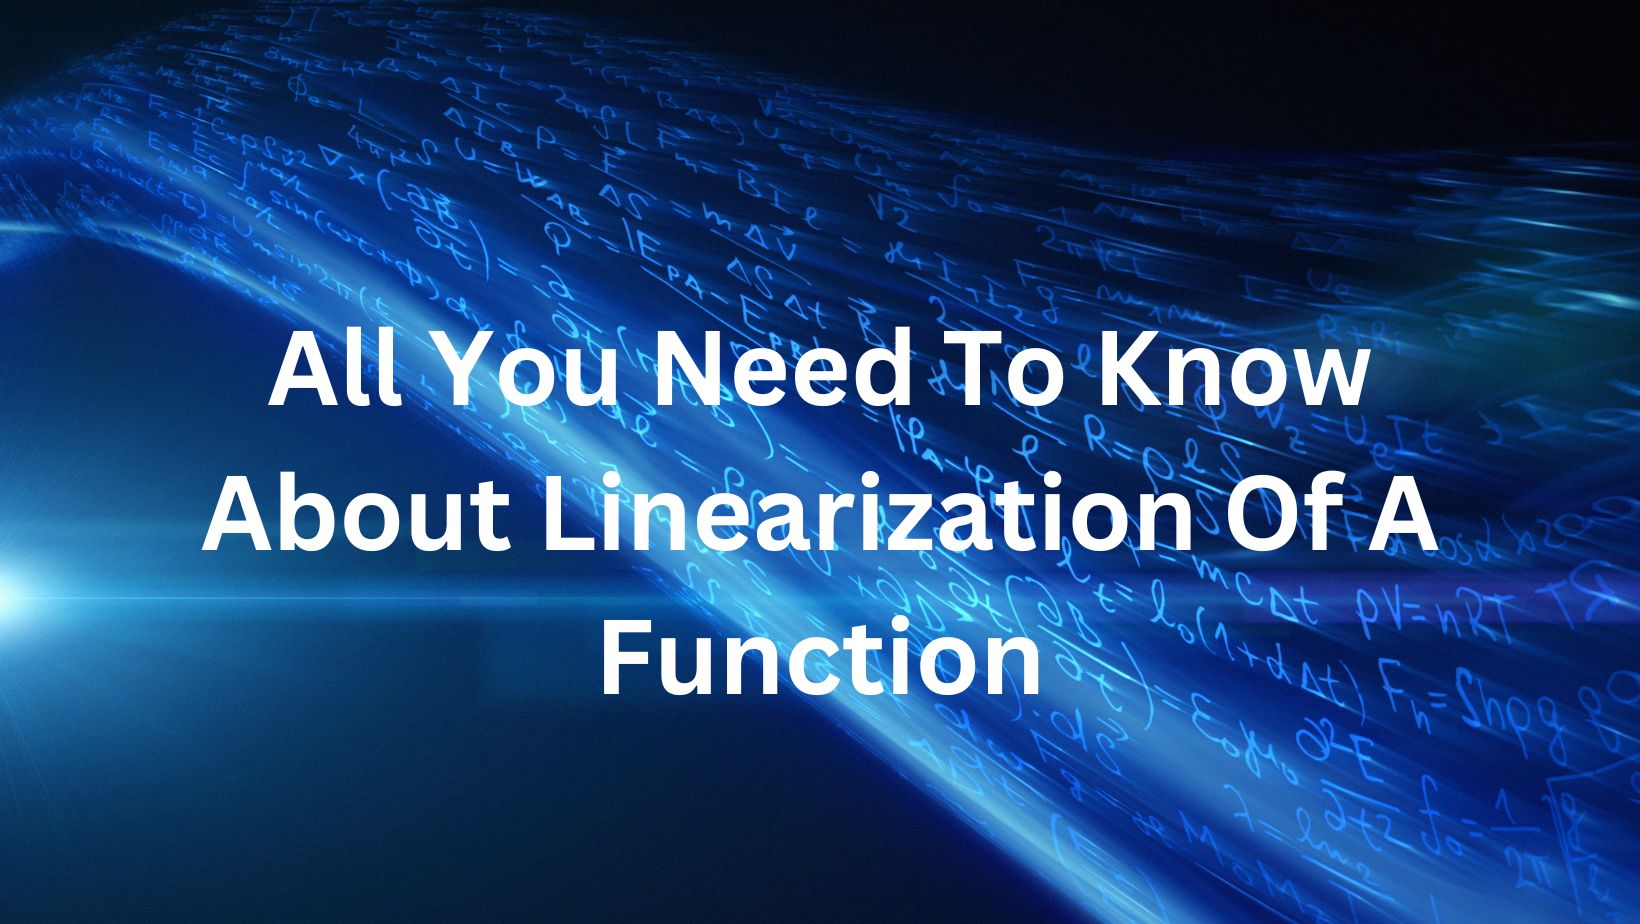 All You Need To Know About Linearization Of A Function